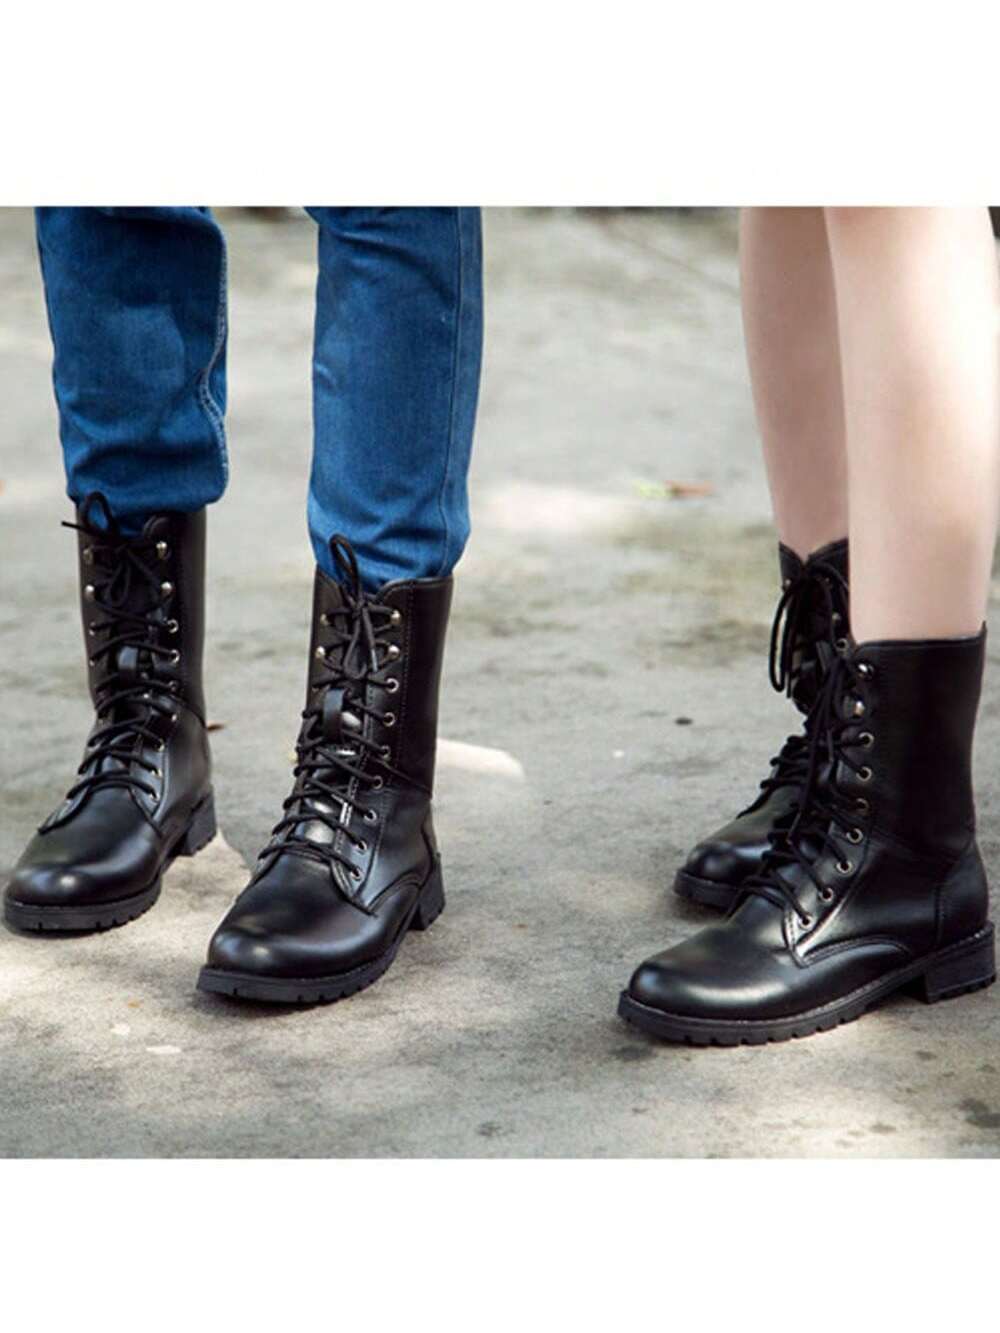 1 Pair Fashionable British-Style Mid-Heel Boots With Laces For Men And Women, Motorcycle Boots-Black-5